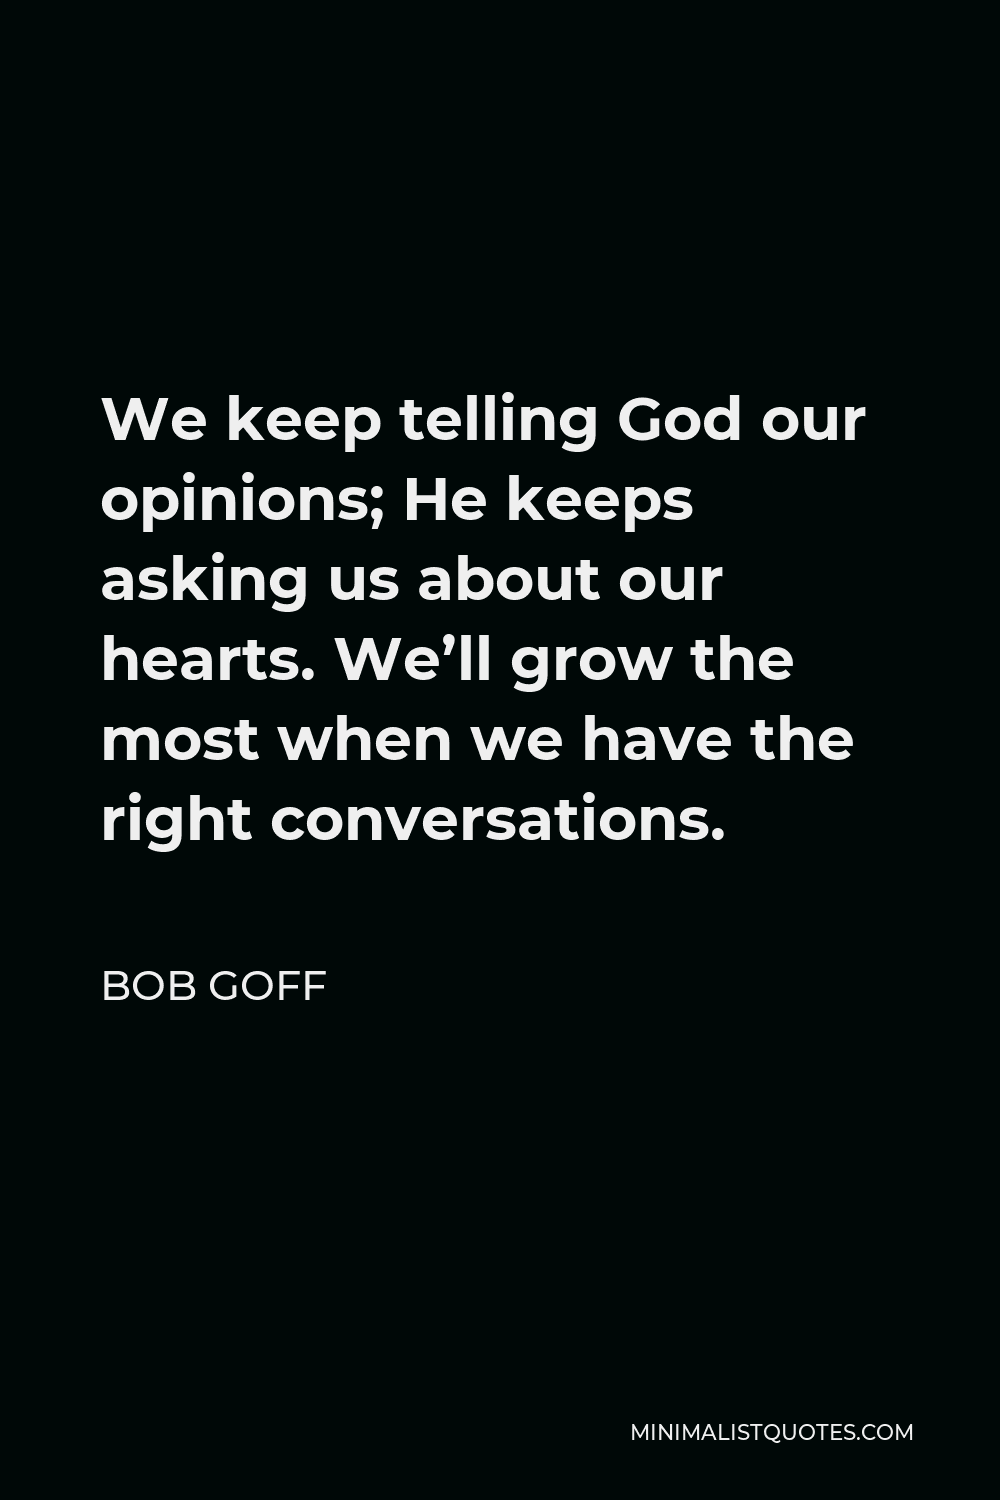 Bob Goff Quote - We keep telling God our opinions; He keeps asking us about our hearts. We’ll grow the most when we have the right conversations.